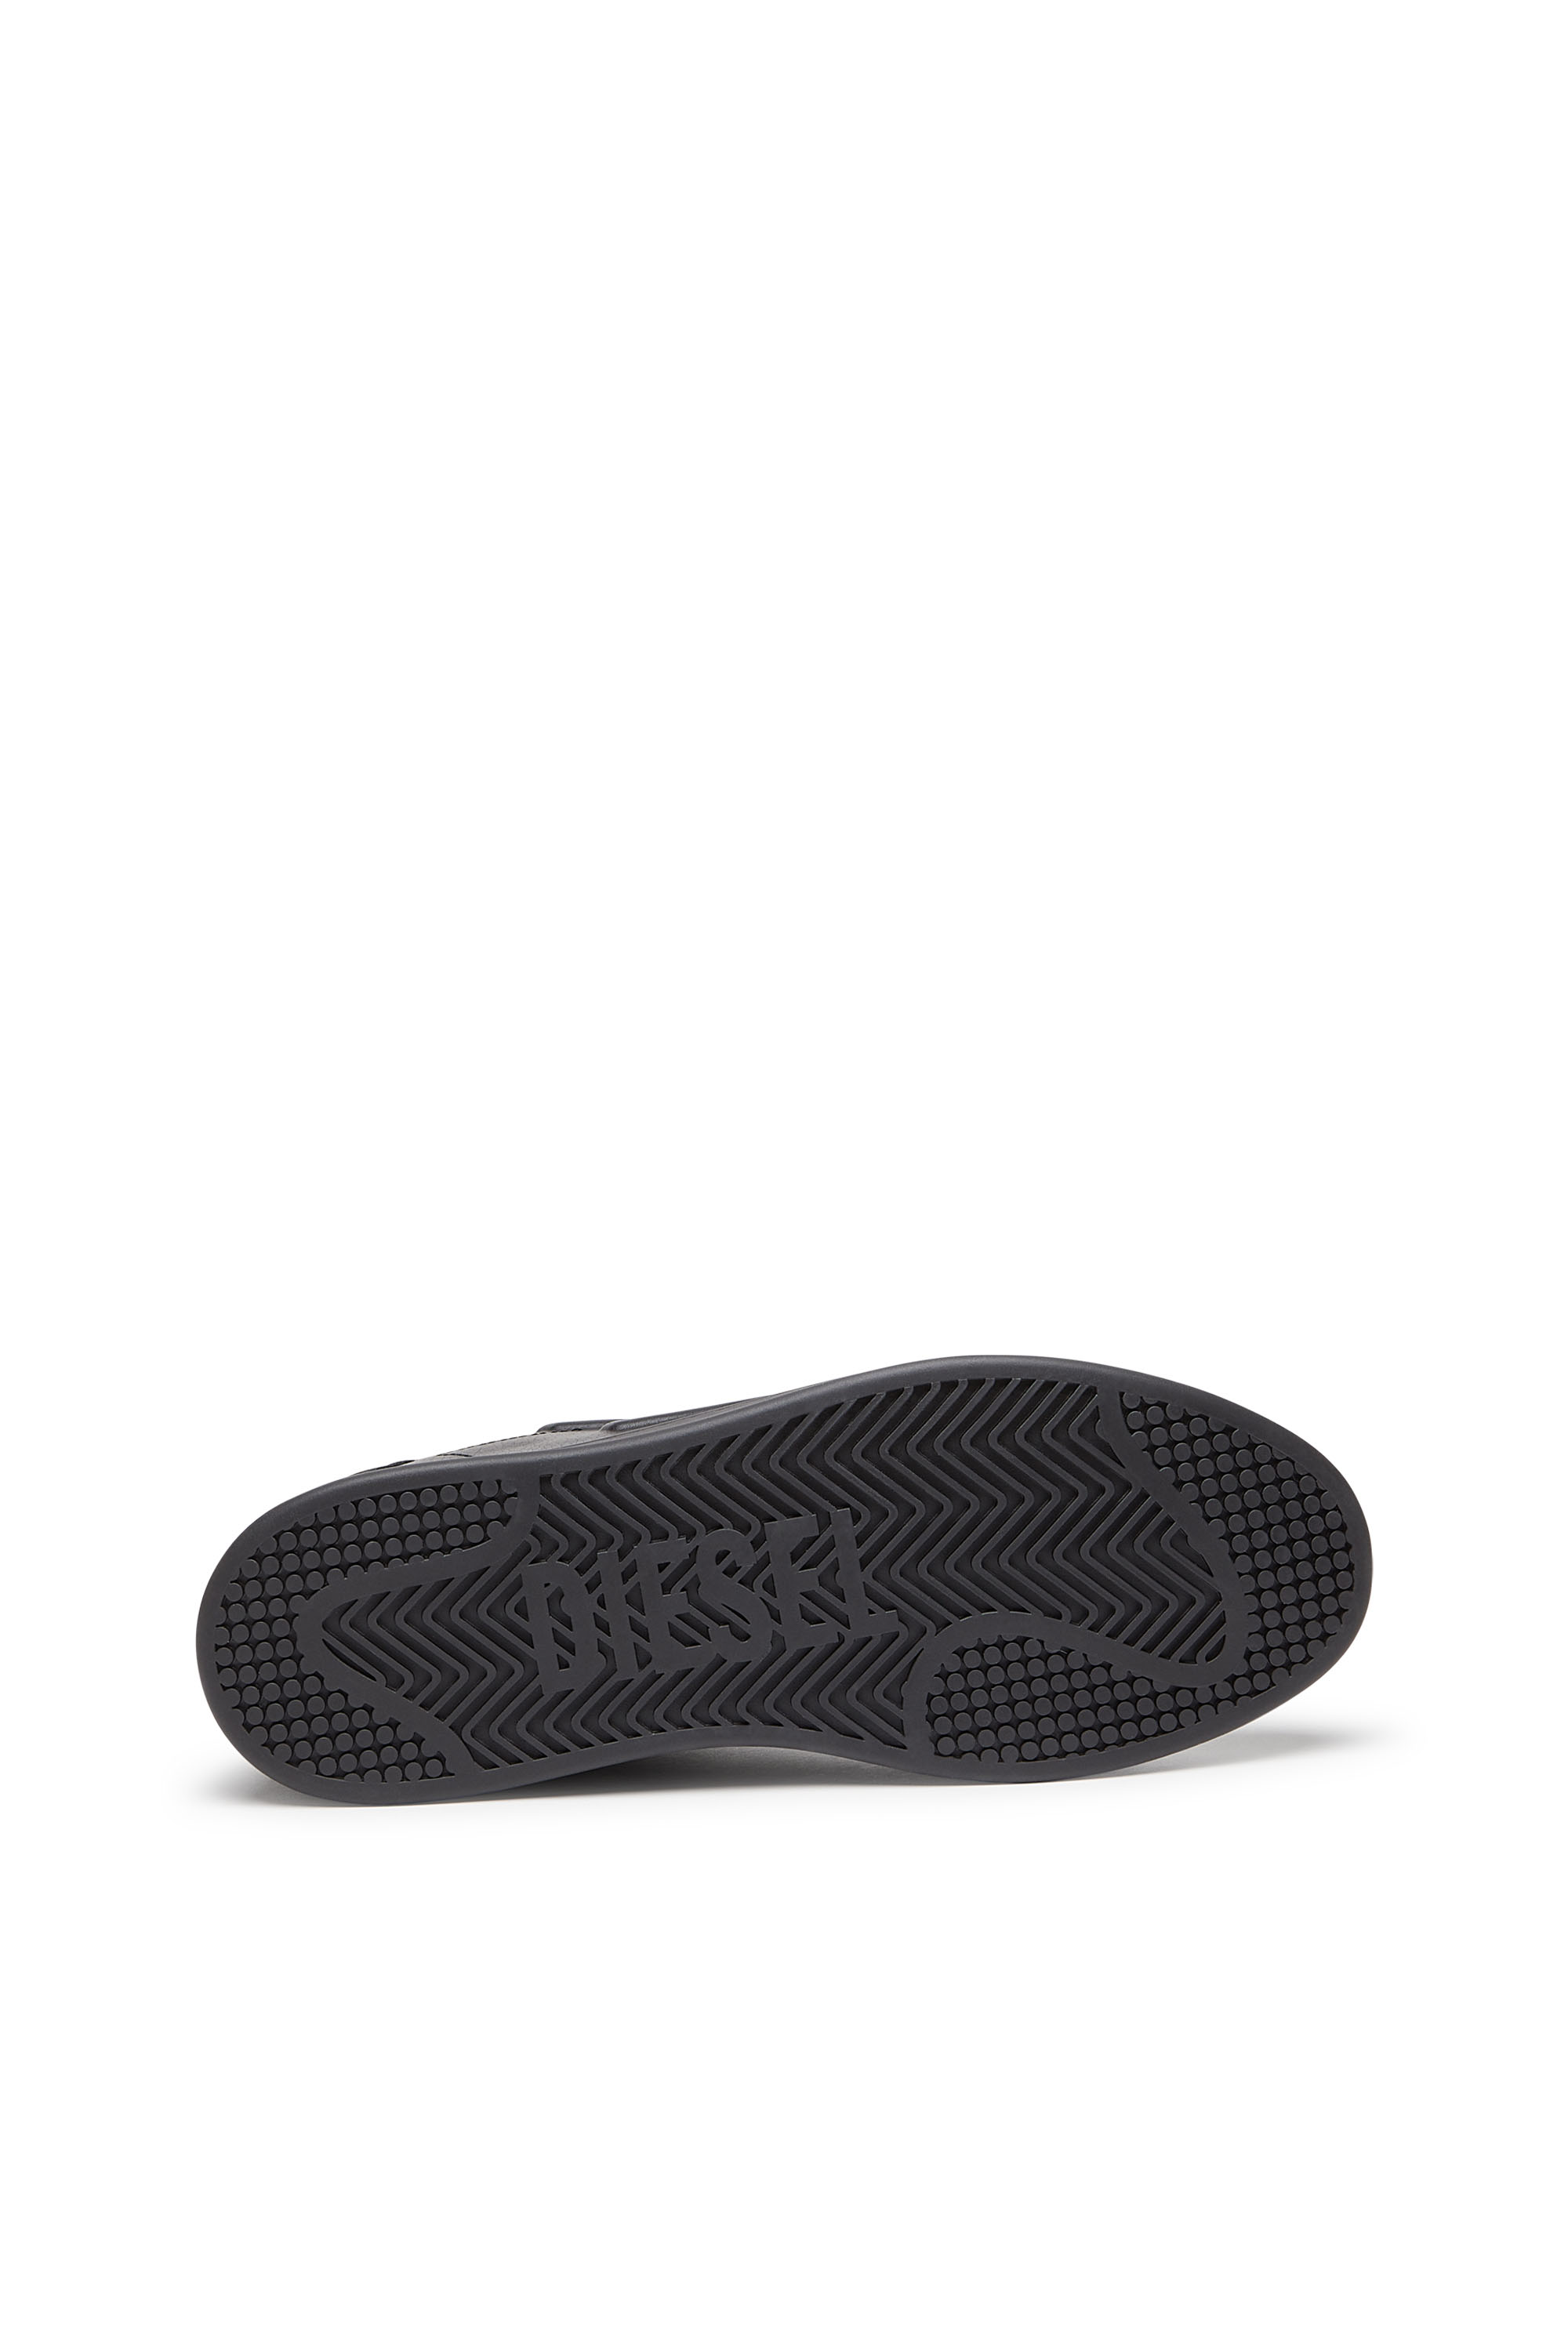 Diesel - S-ATHENE LOW, Man S-Athene Low-Sneakers with embossed D logo in Black - Image 4